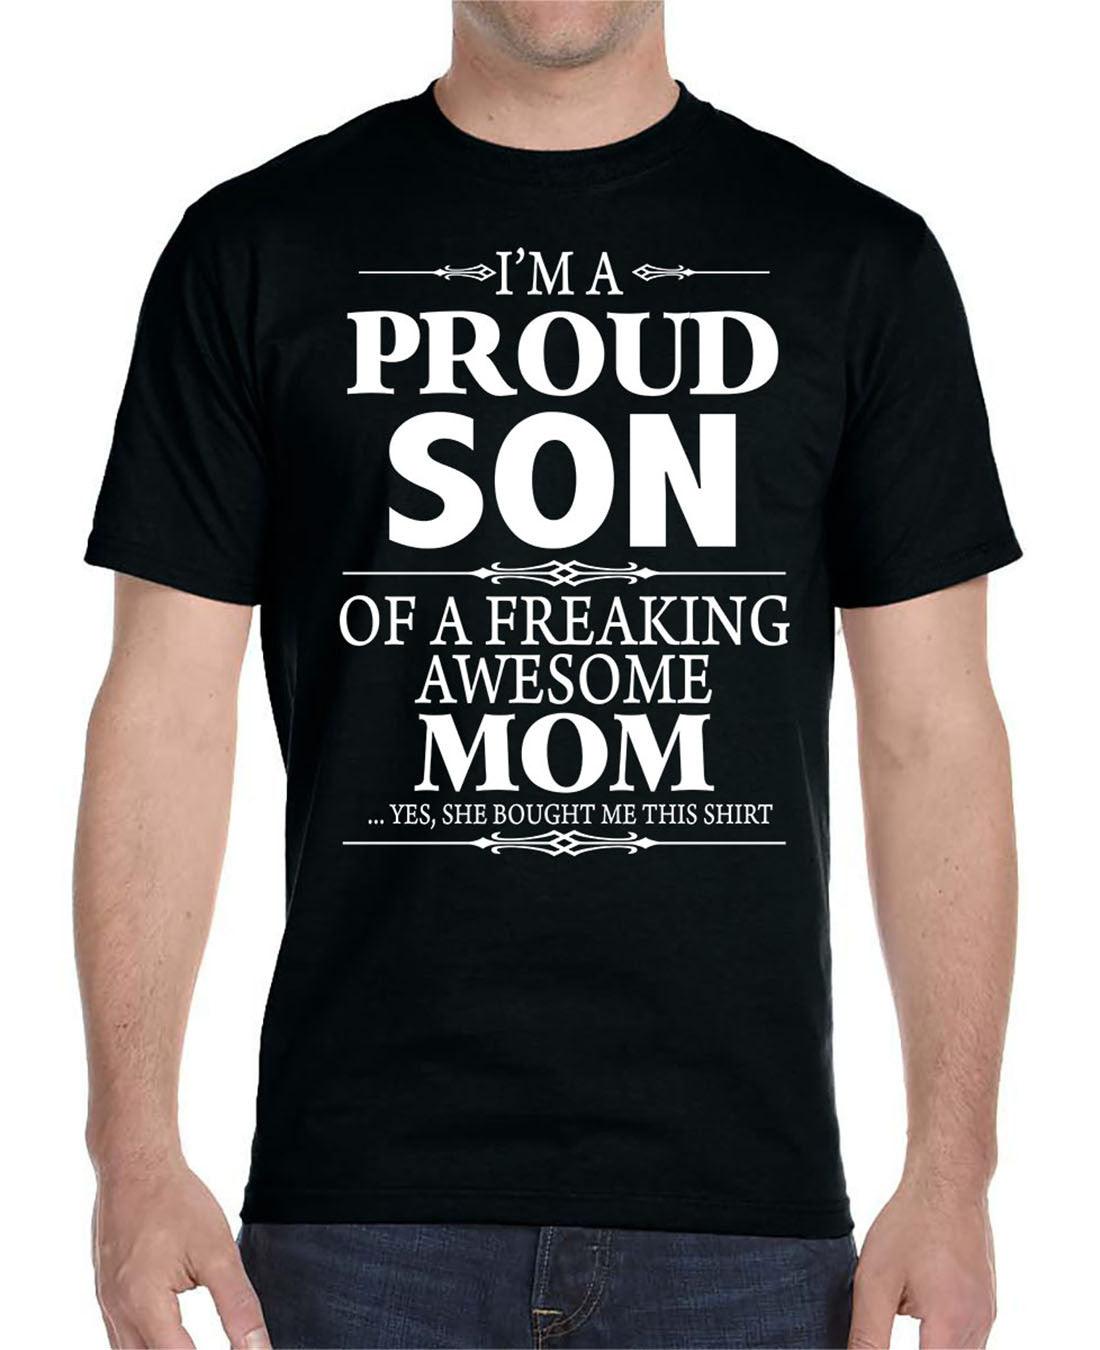 I'm A Proud Son Of A Freaking Awesome Mom- Unisex T-Shirt Son Shirt